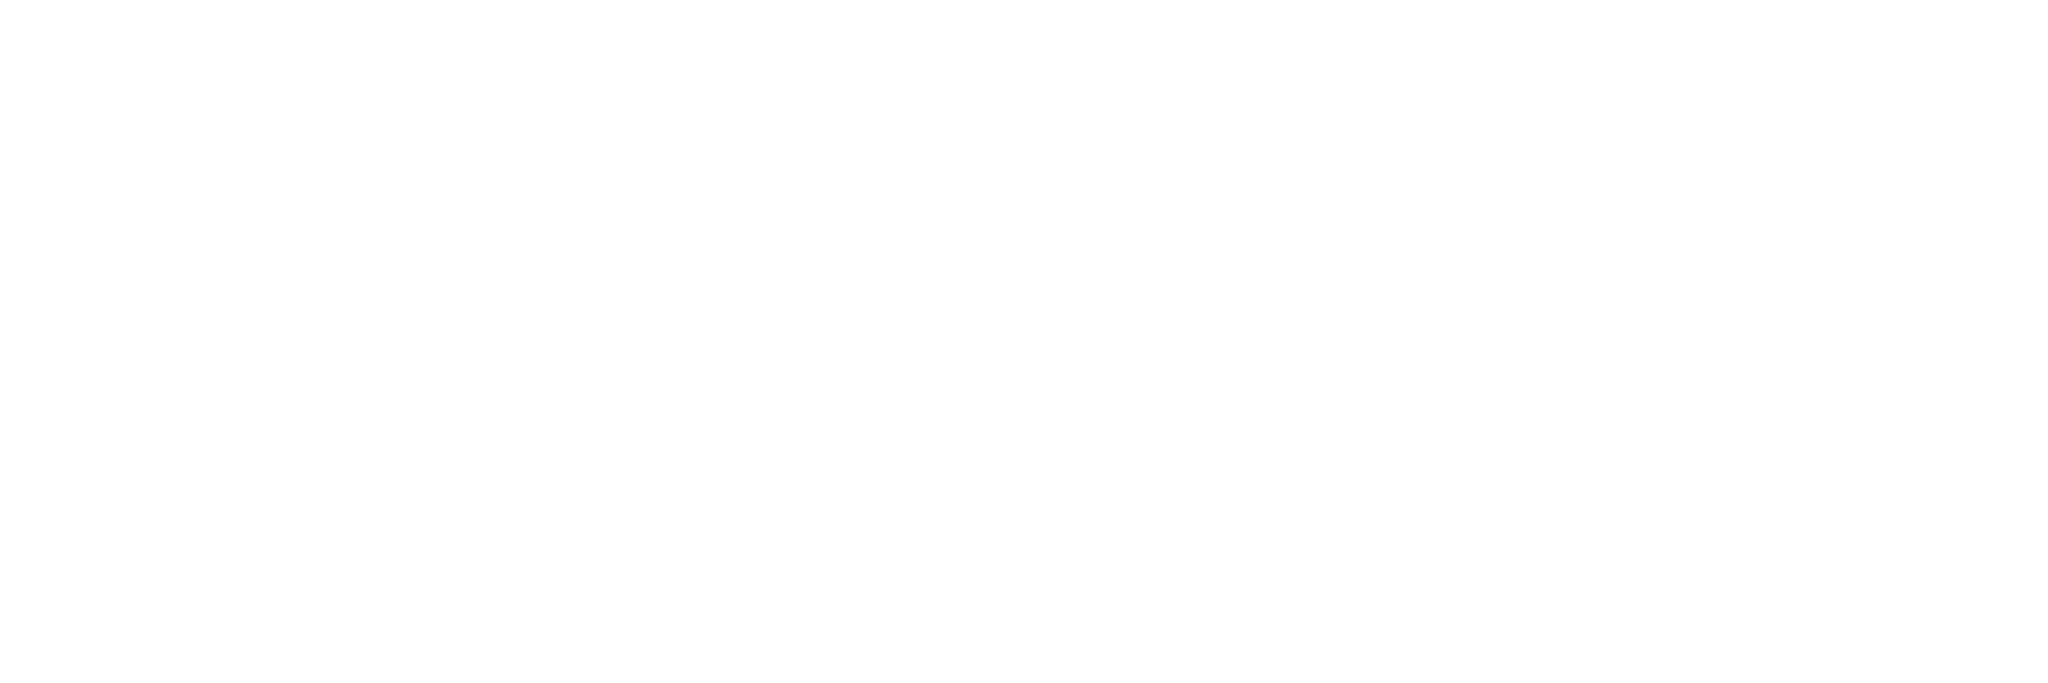 Back Alley Bikes - Home page logo